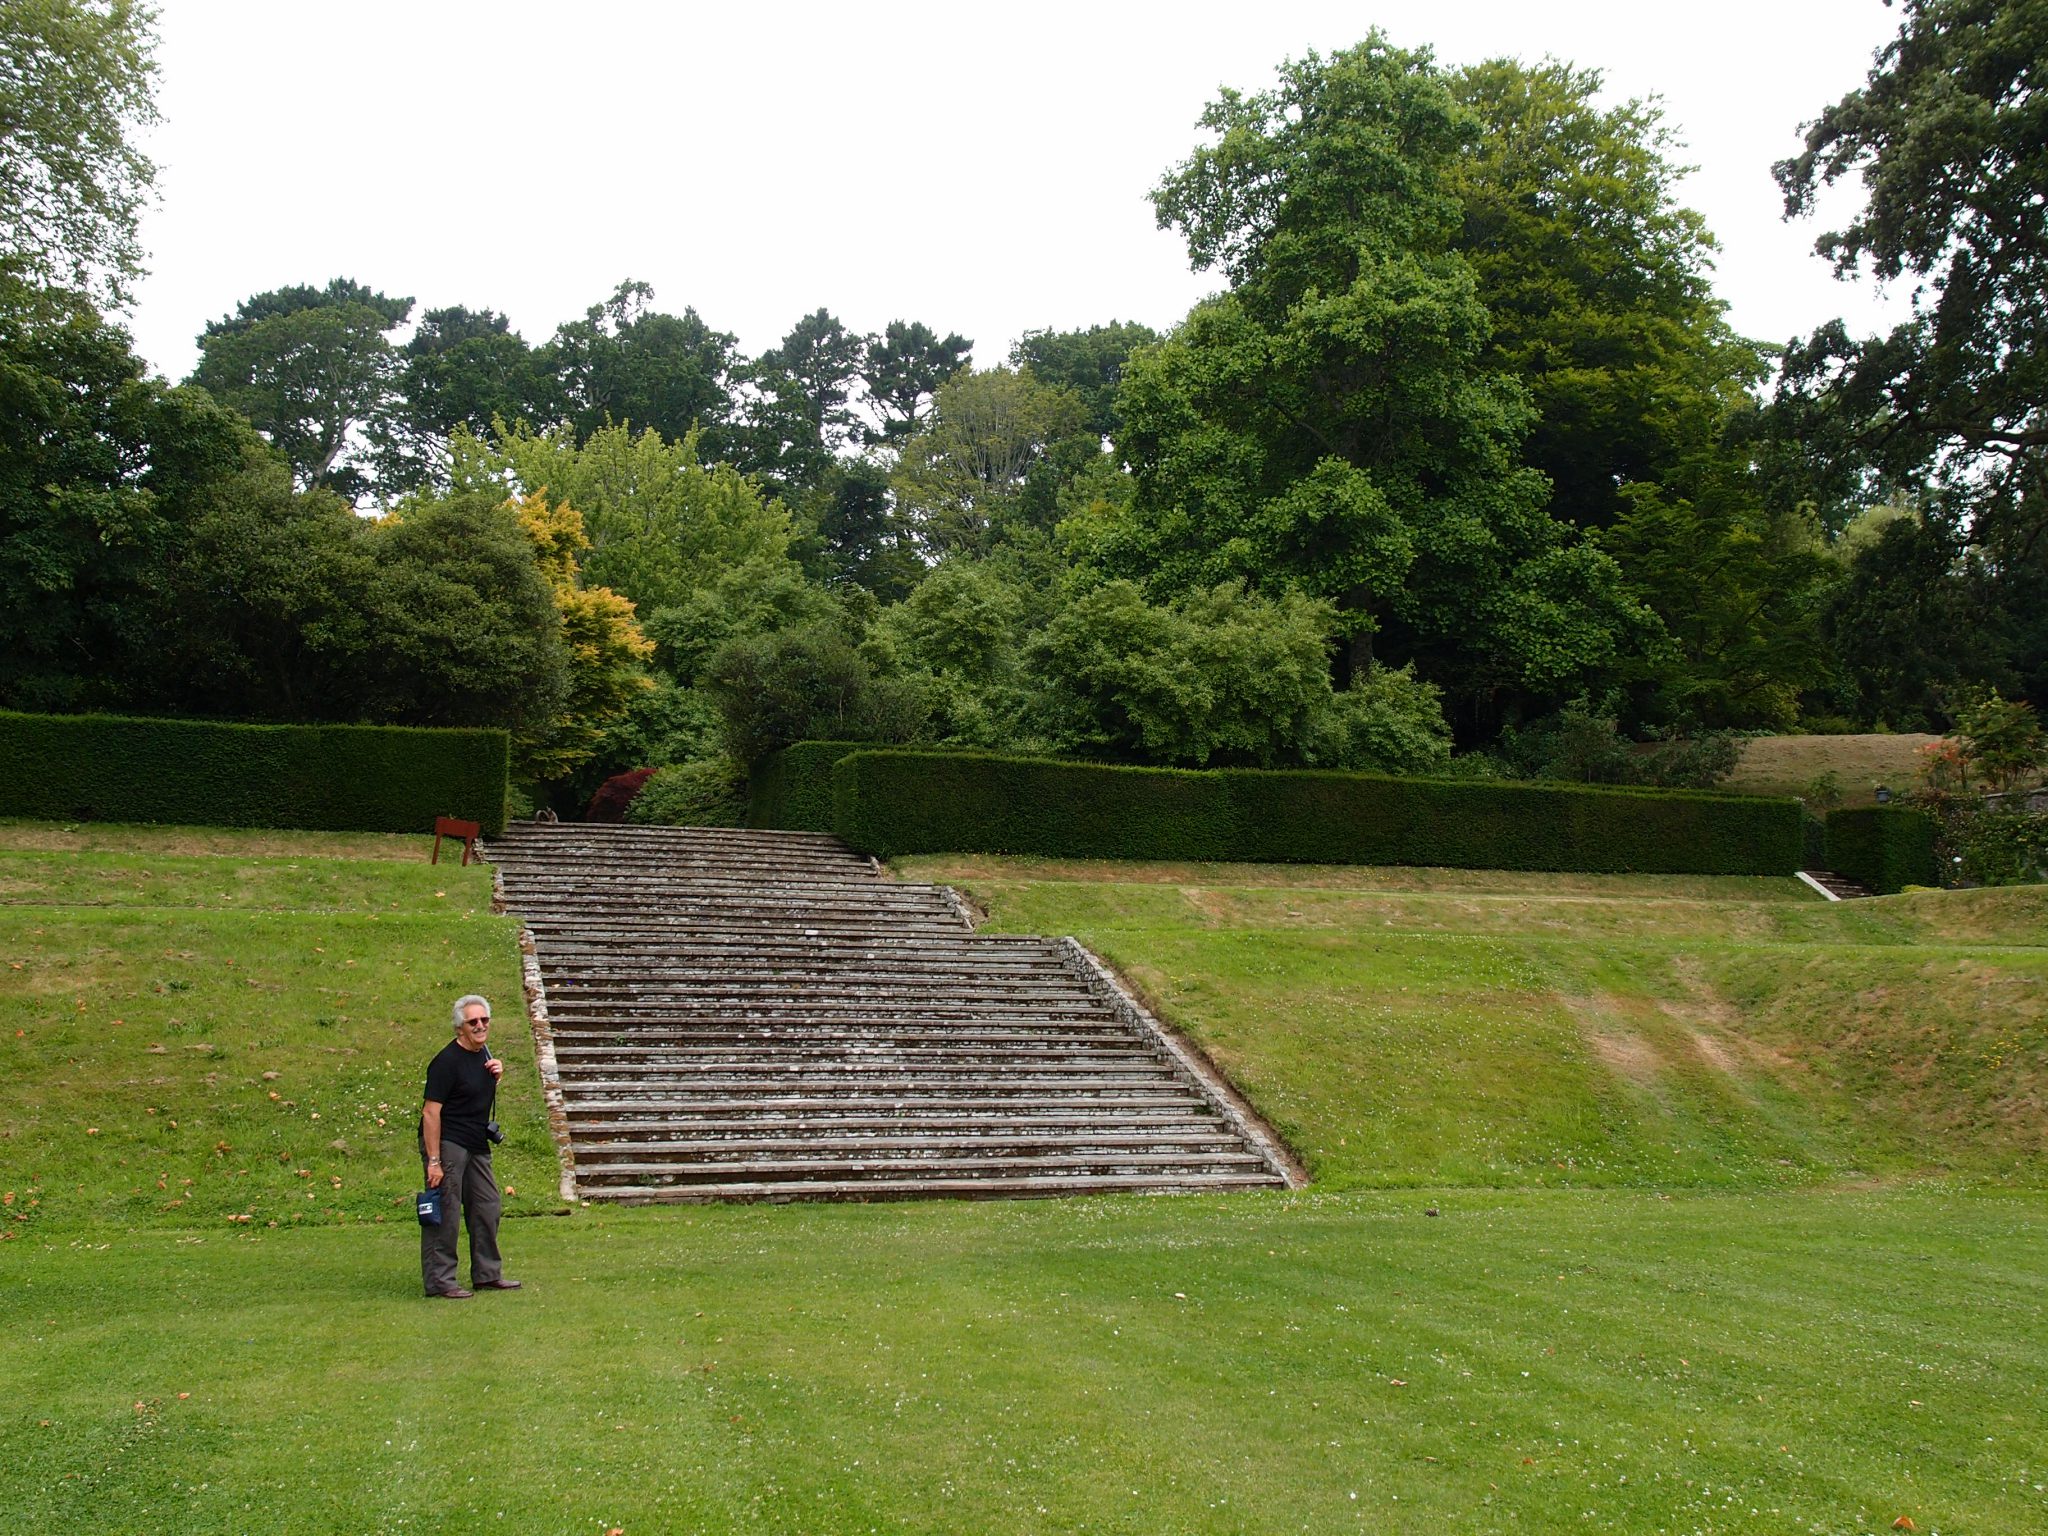 David, supplying human scale, at the north end of the Tiltyard. This flight of steps leads up to the Swan Fountain Terrace.